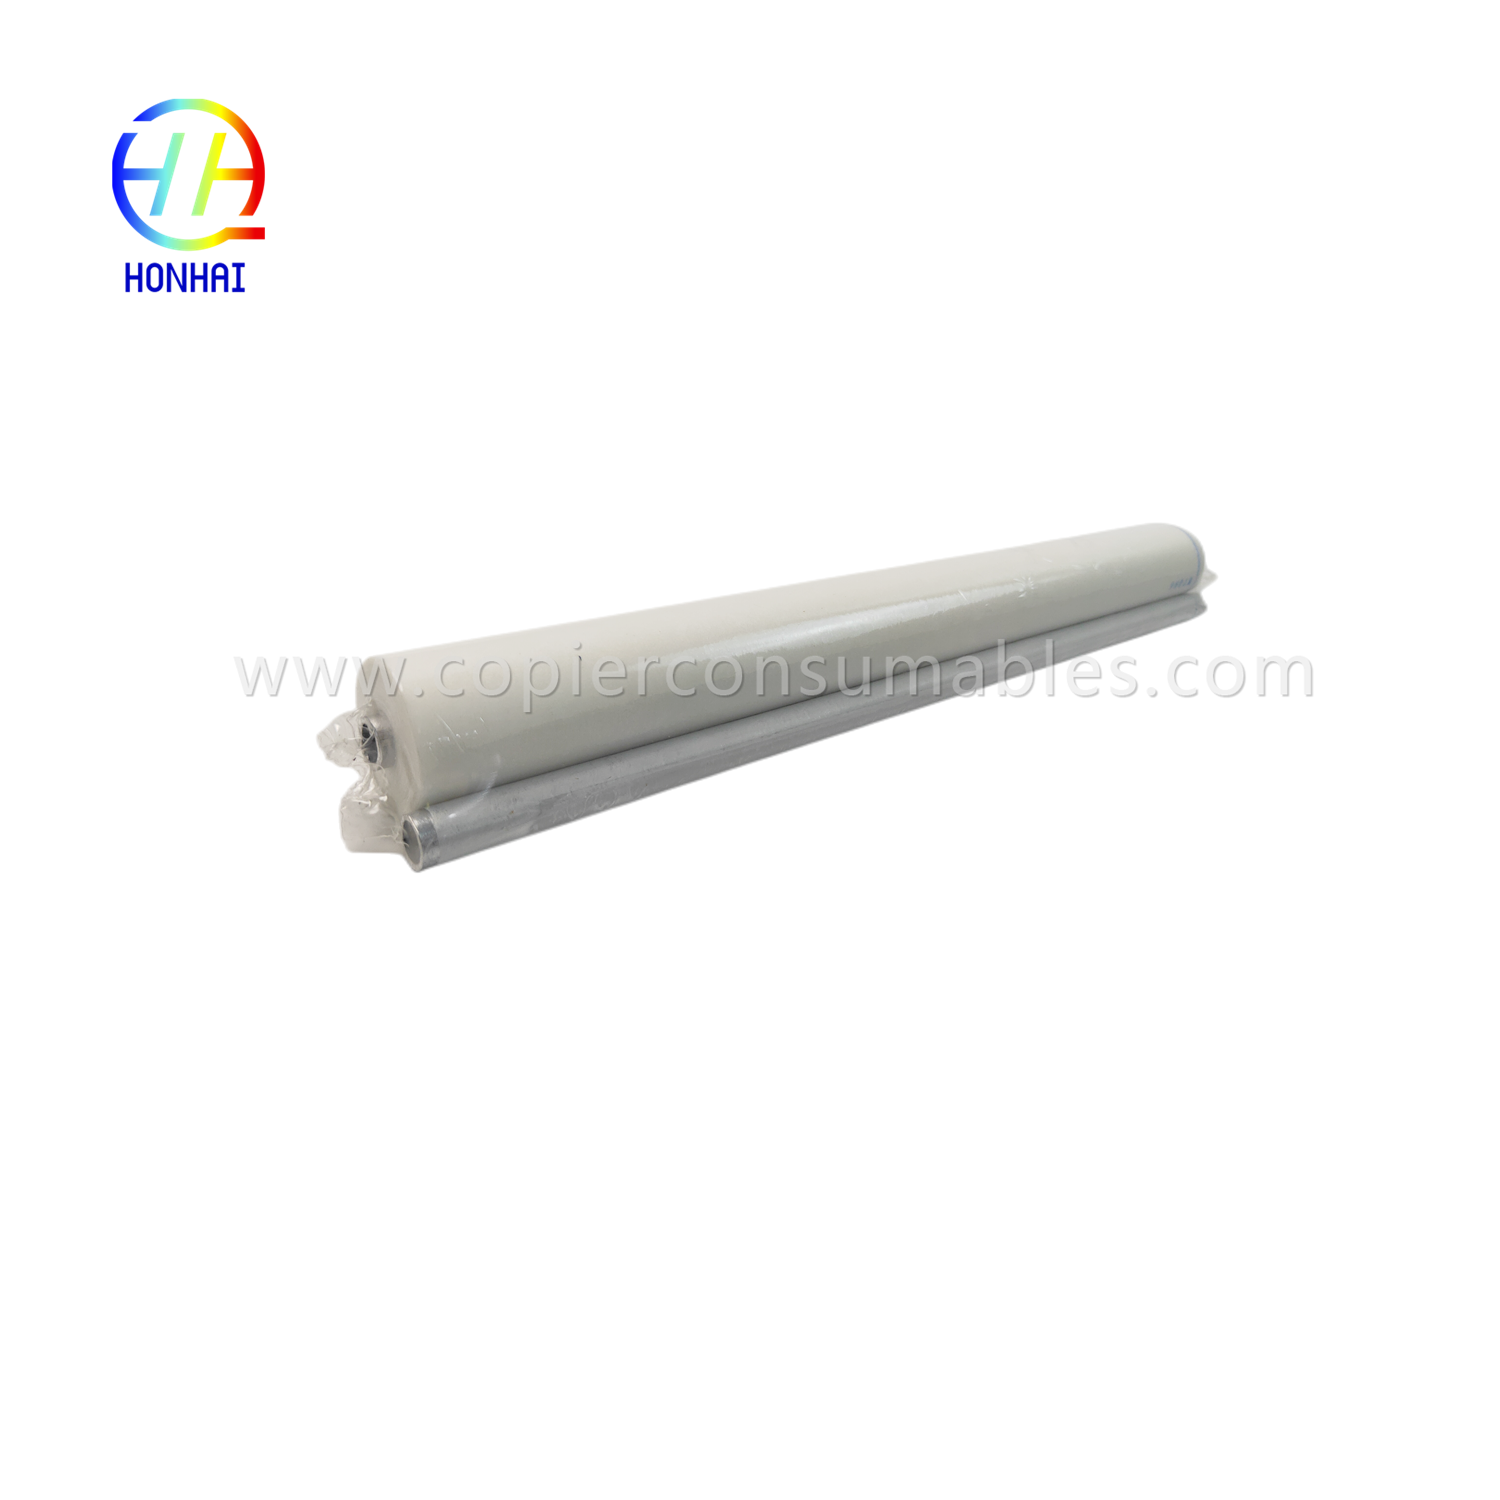 https://www.copierconsumables.com/fuser-cleaning-web-for-canon-ir6800-ir-8085-8095-8105-8205-8285-8295-fq-009-fc5-2286-000-oem-fuser- cleaning-fuser-roller-product/